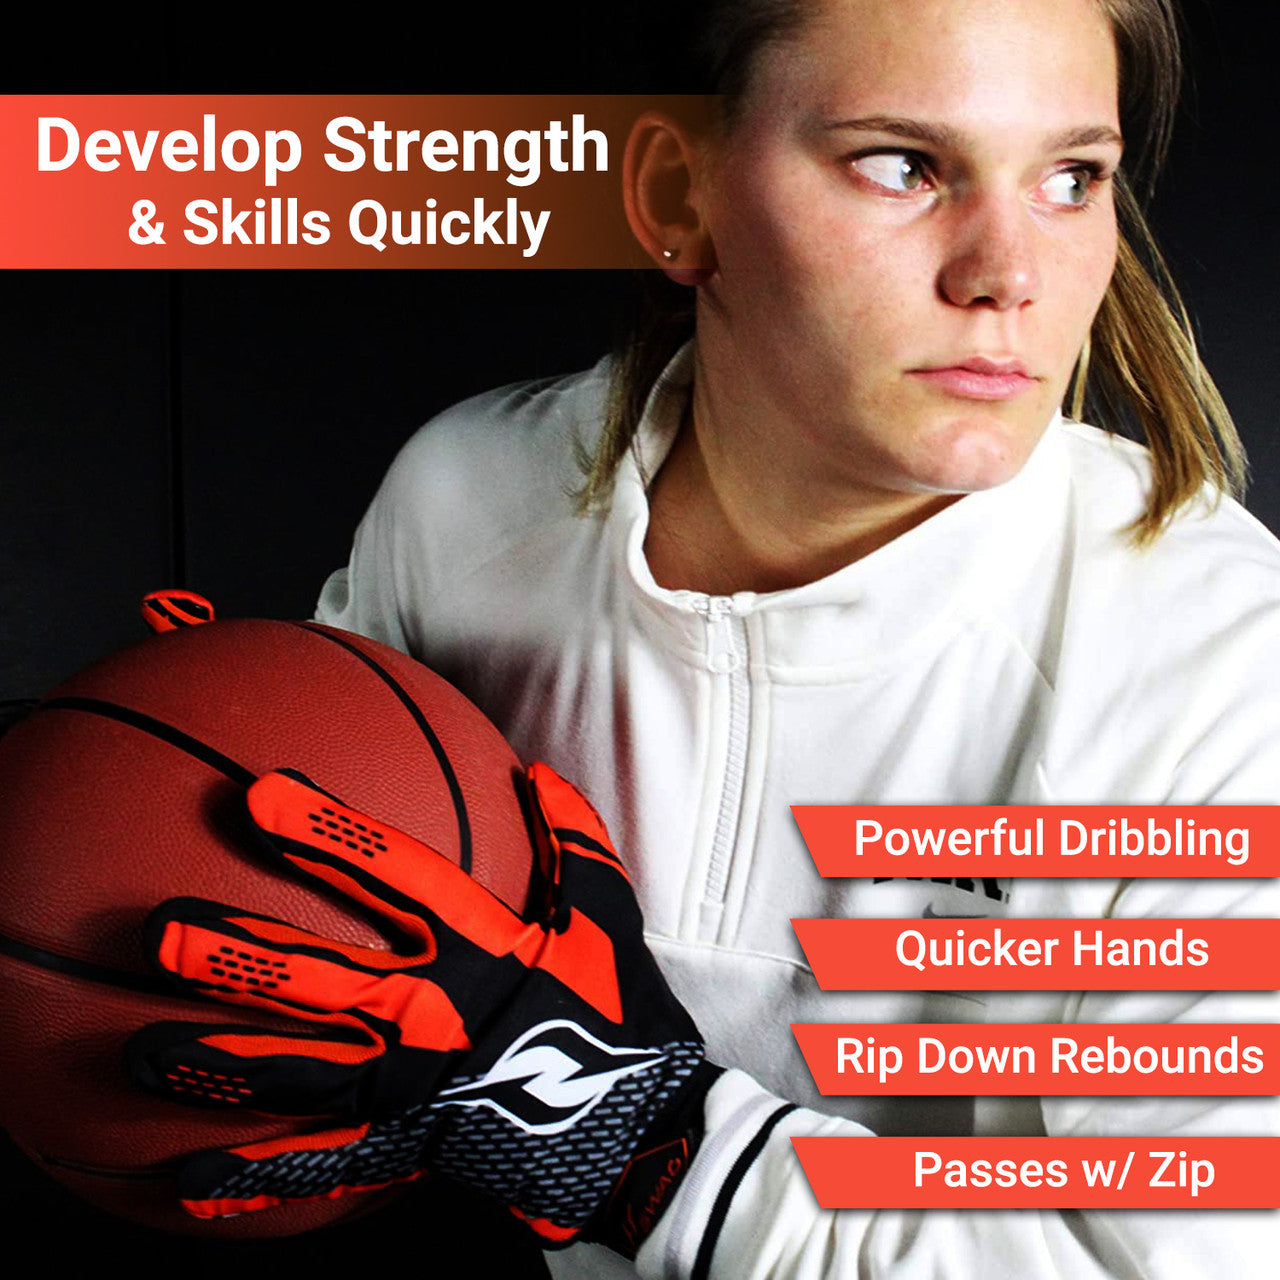 Why use weighted basketball dribbling gloves?